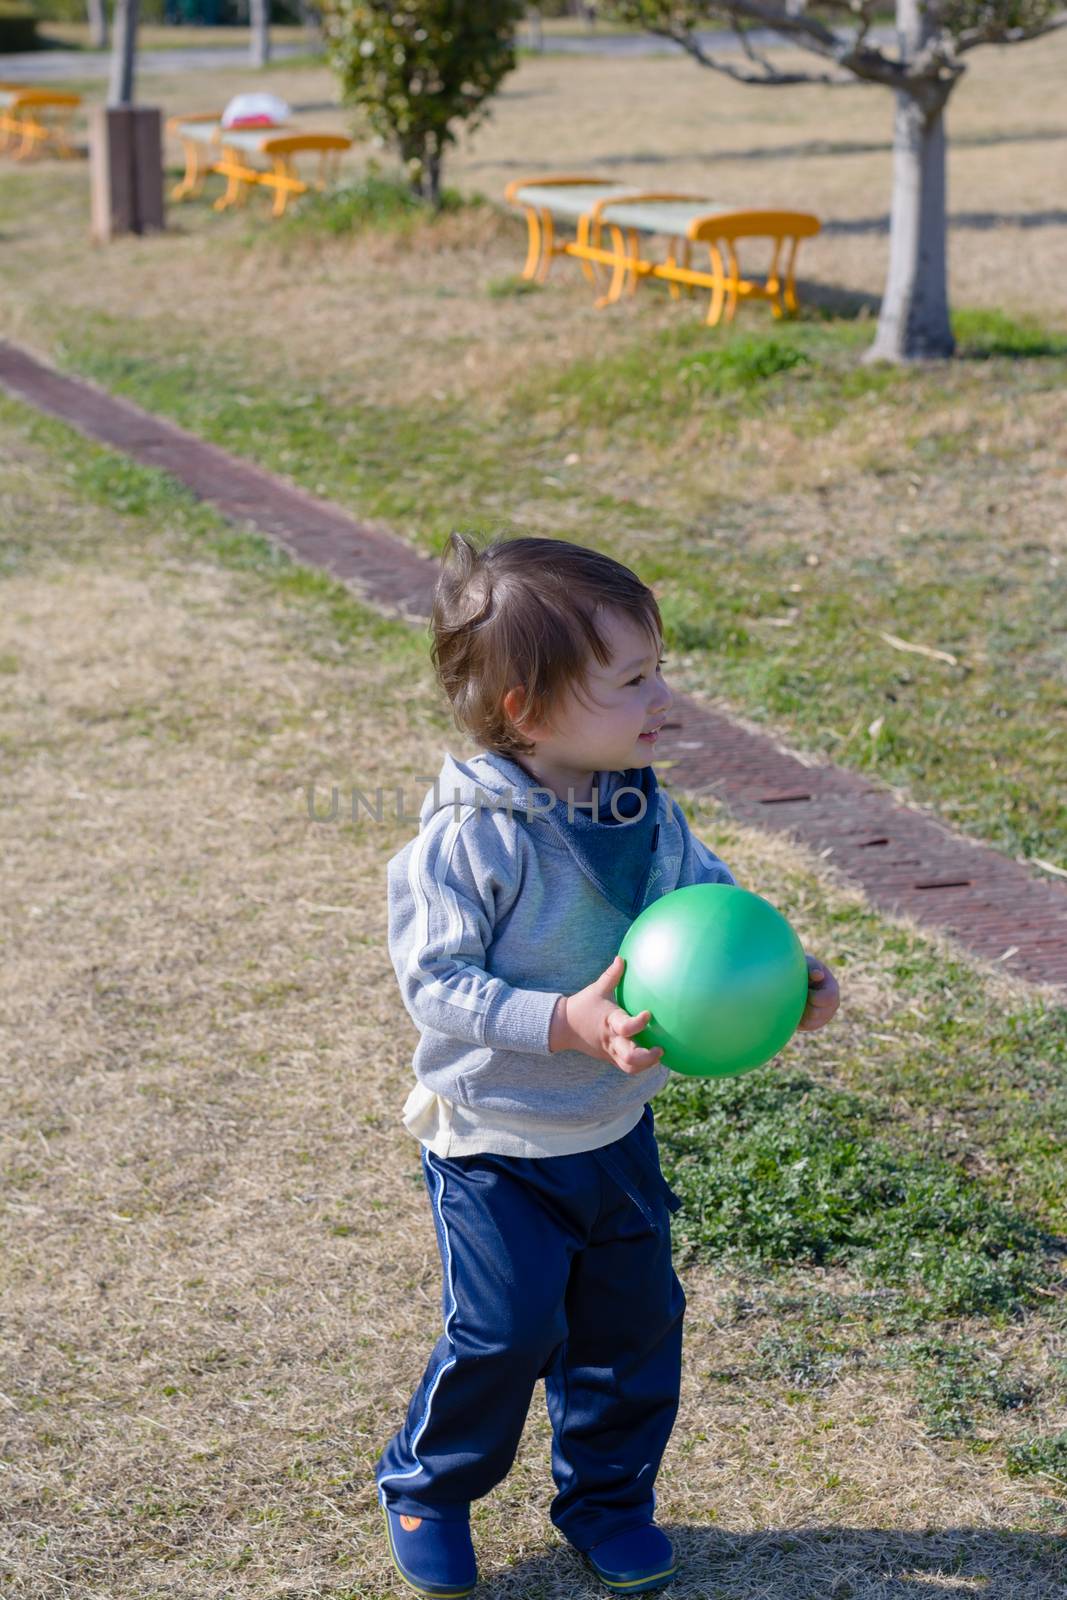 A 2 year old boy holding a ball and smiling at a playground.